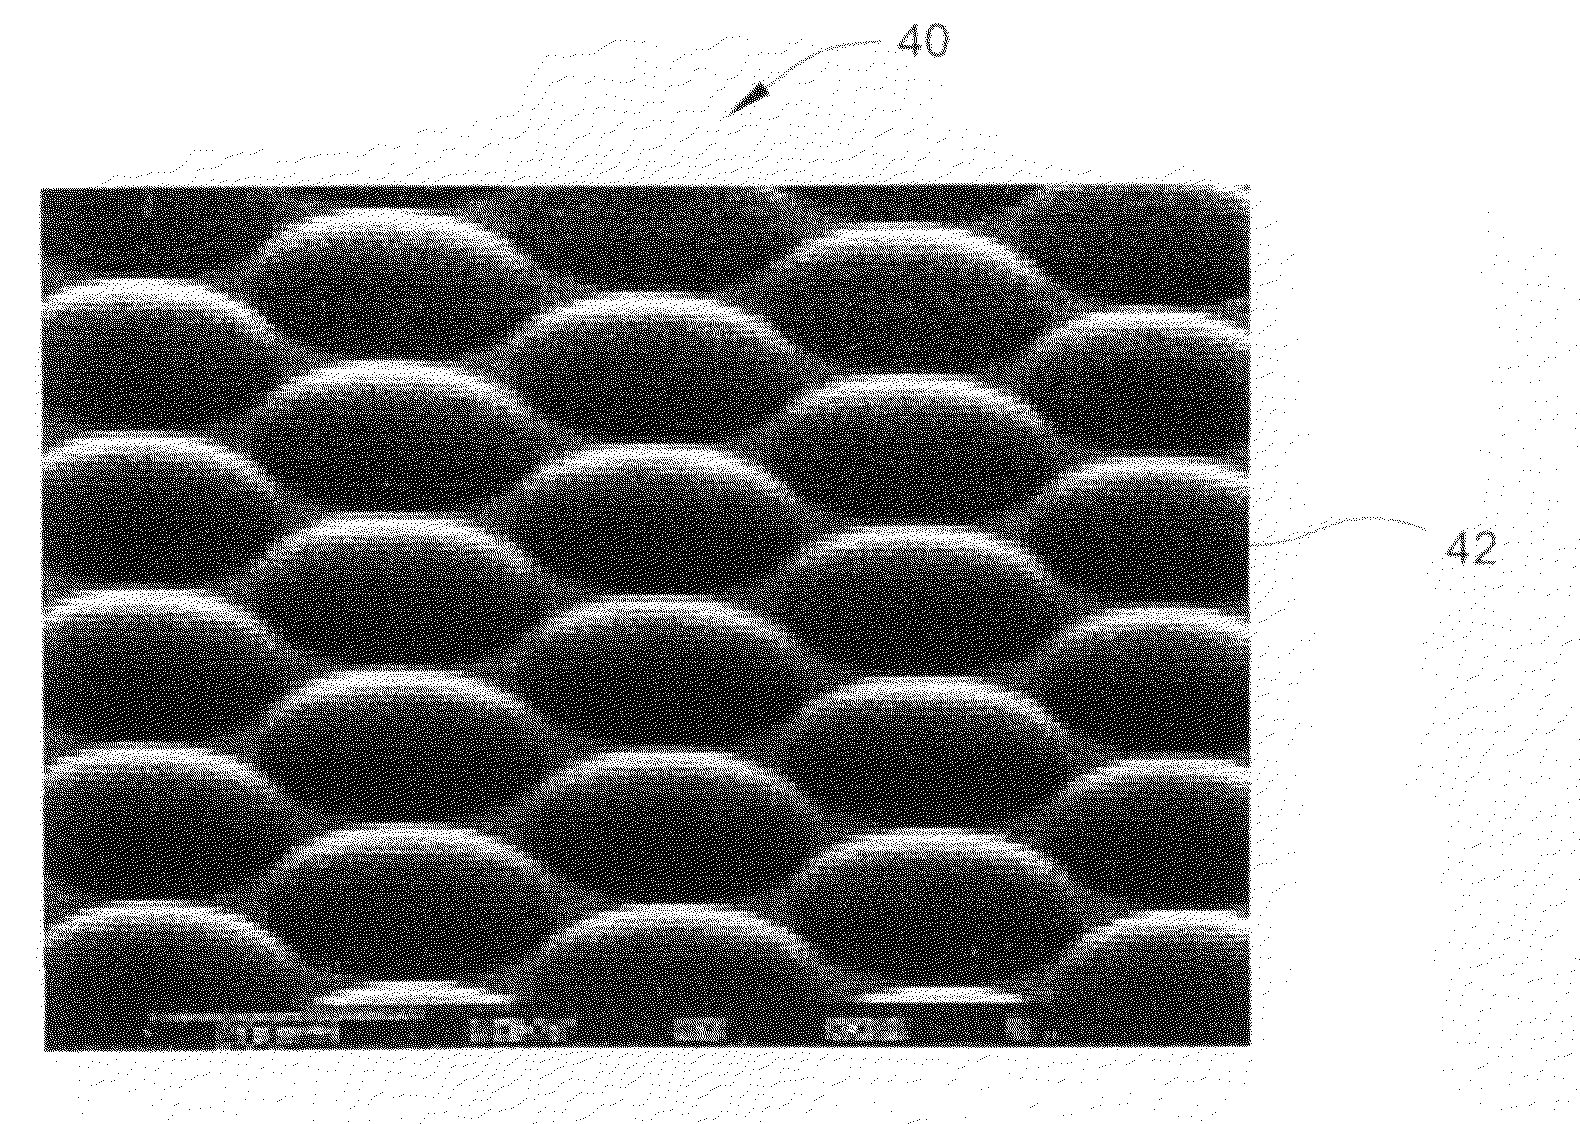 Method of fabricating small dimensioned lens elements and lens arrays using surface tension effects